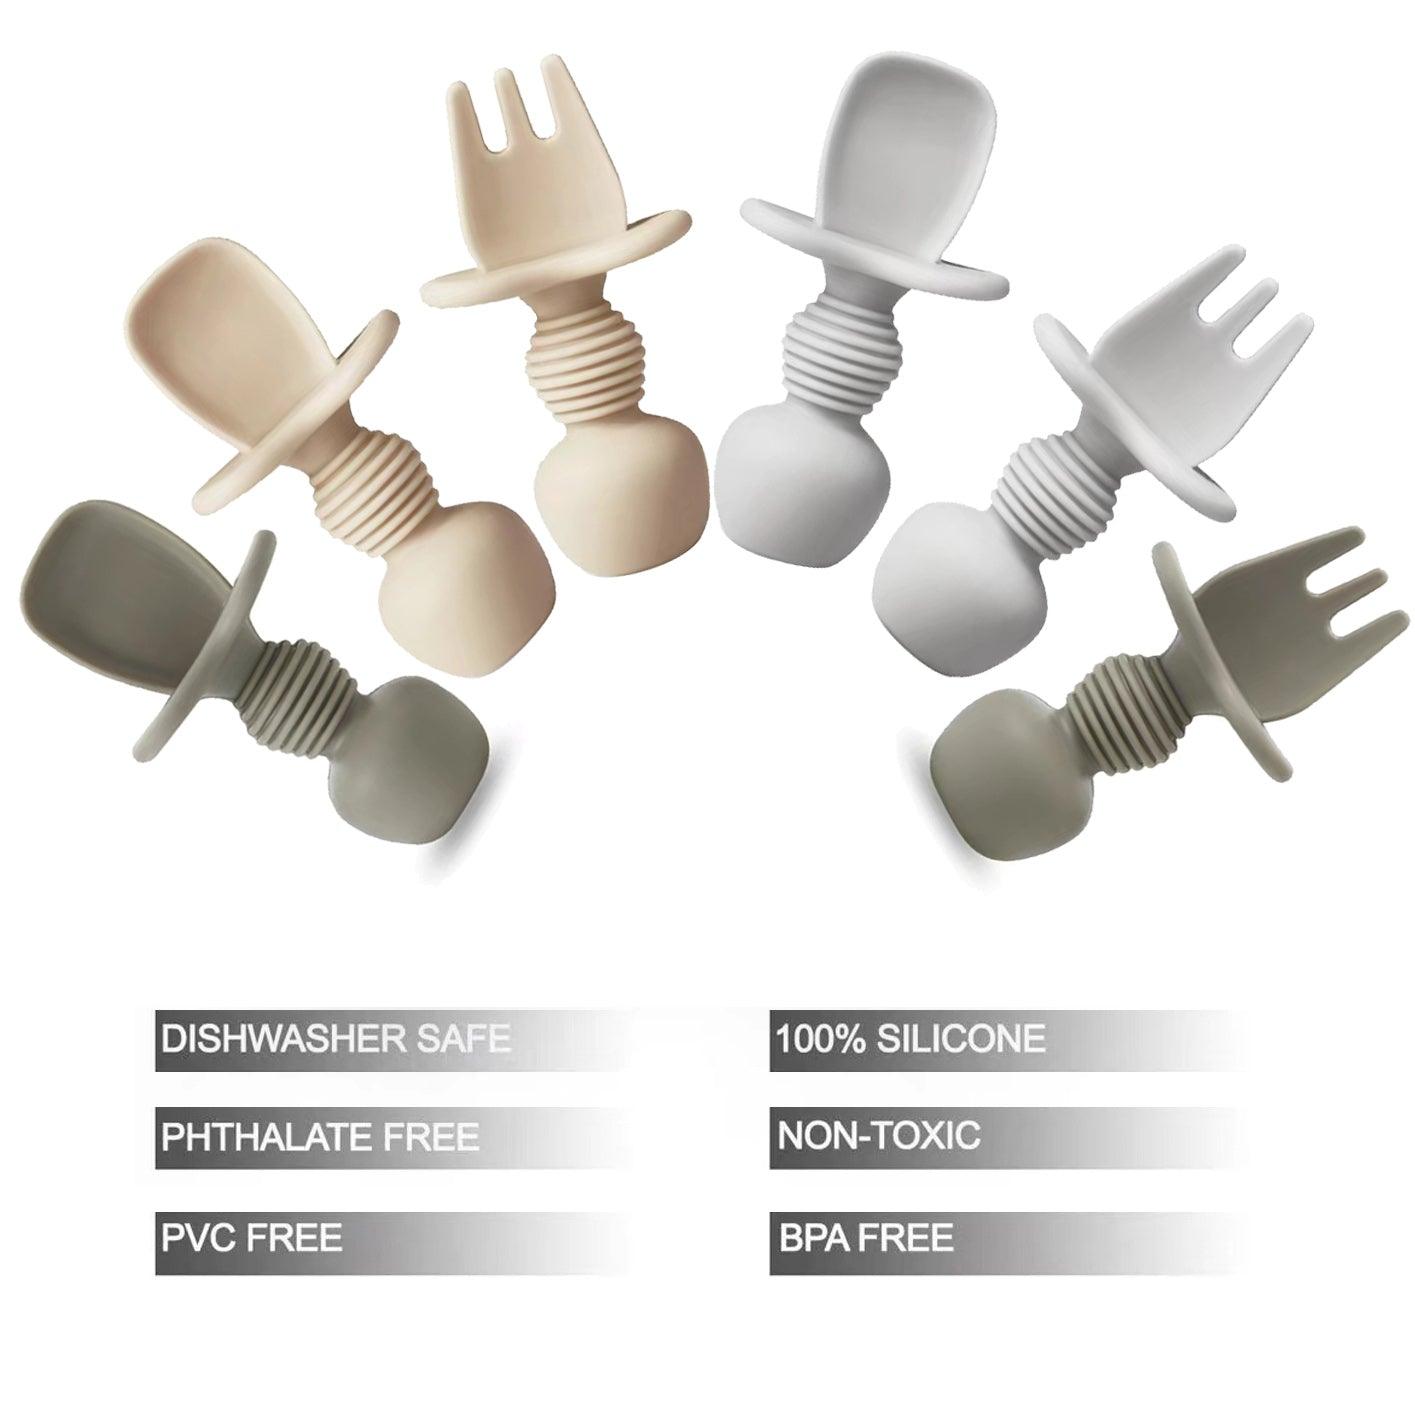 Silicone BLW Baby Spoons and Fork Feeding Set (6-Pack) - PandaEar